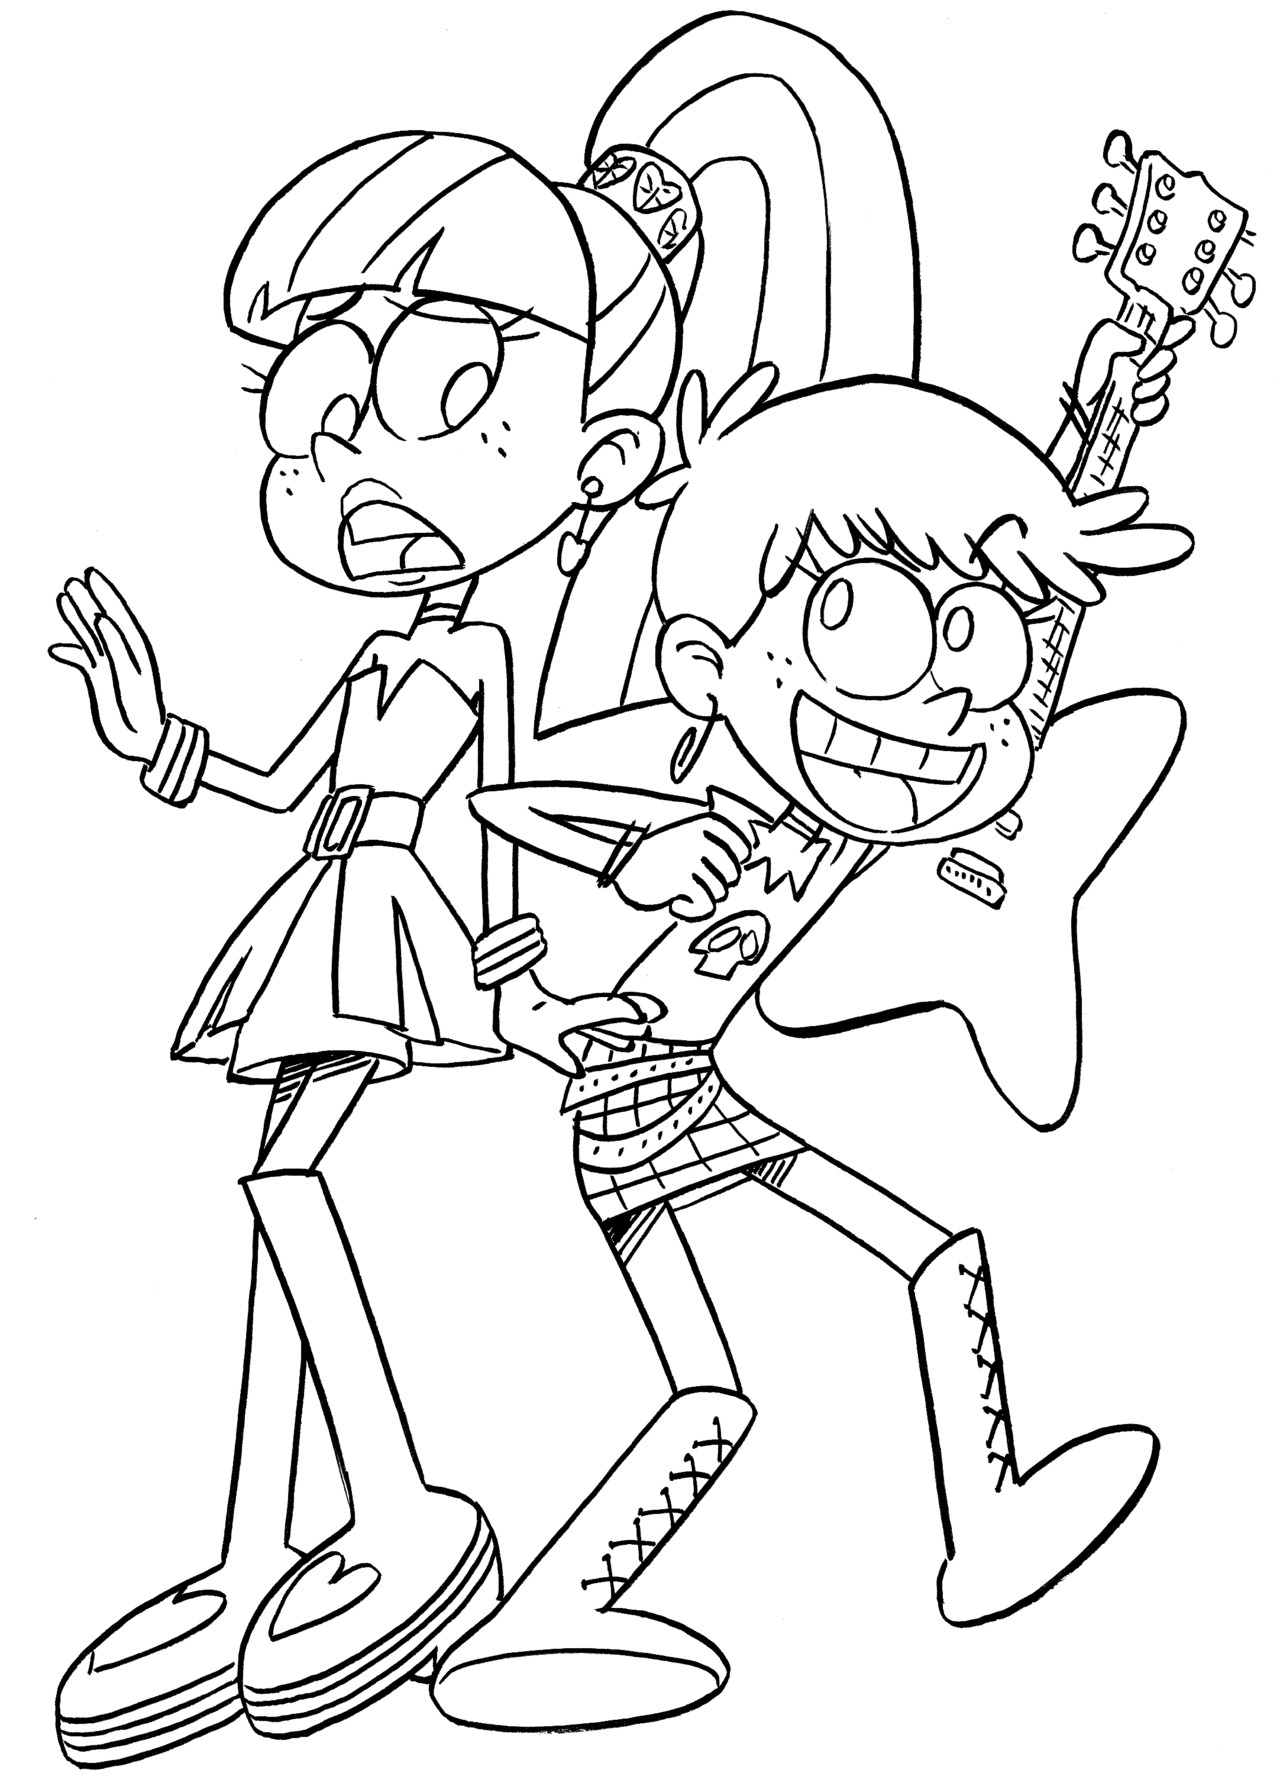 Coloring Pages : Coloring Free Of The Loud House In For Kids ...